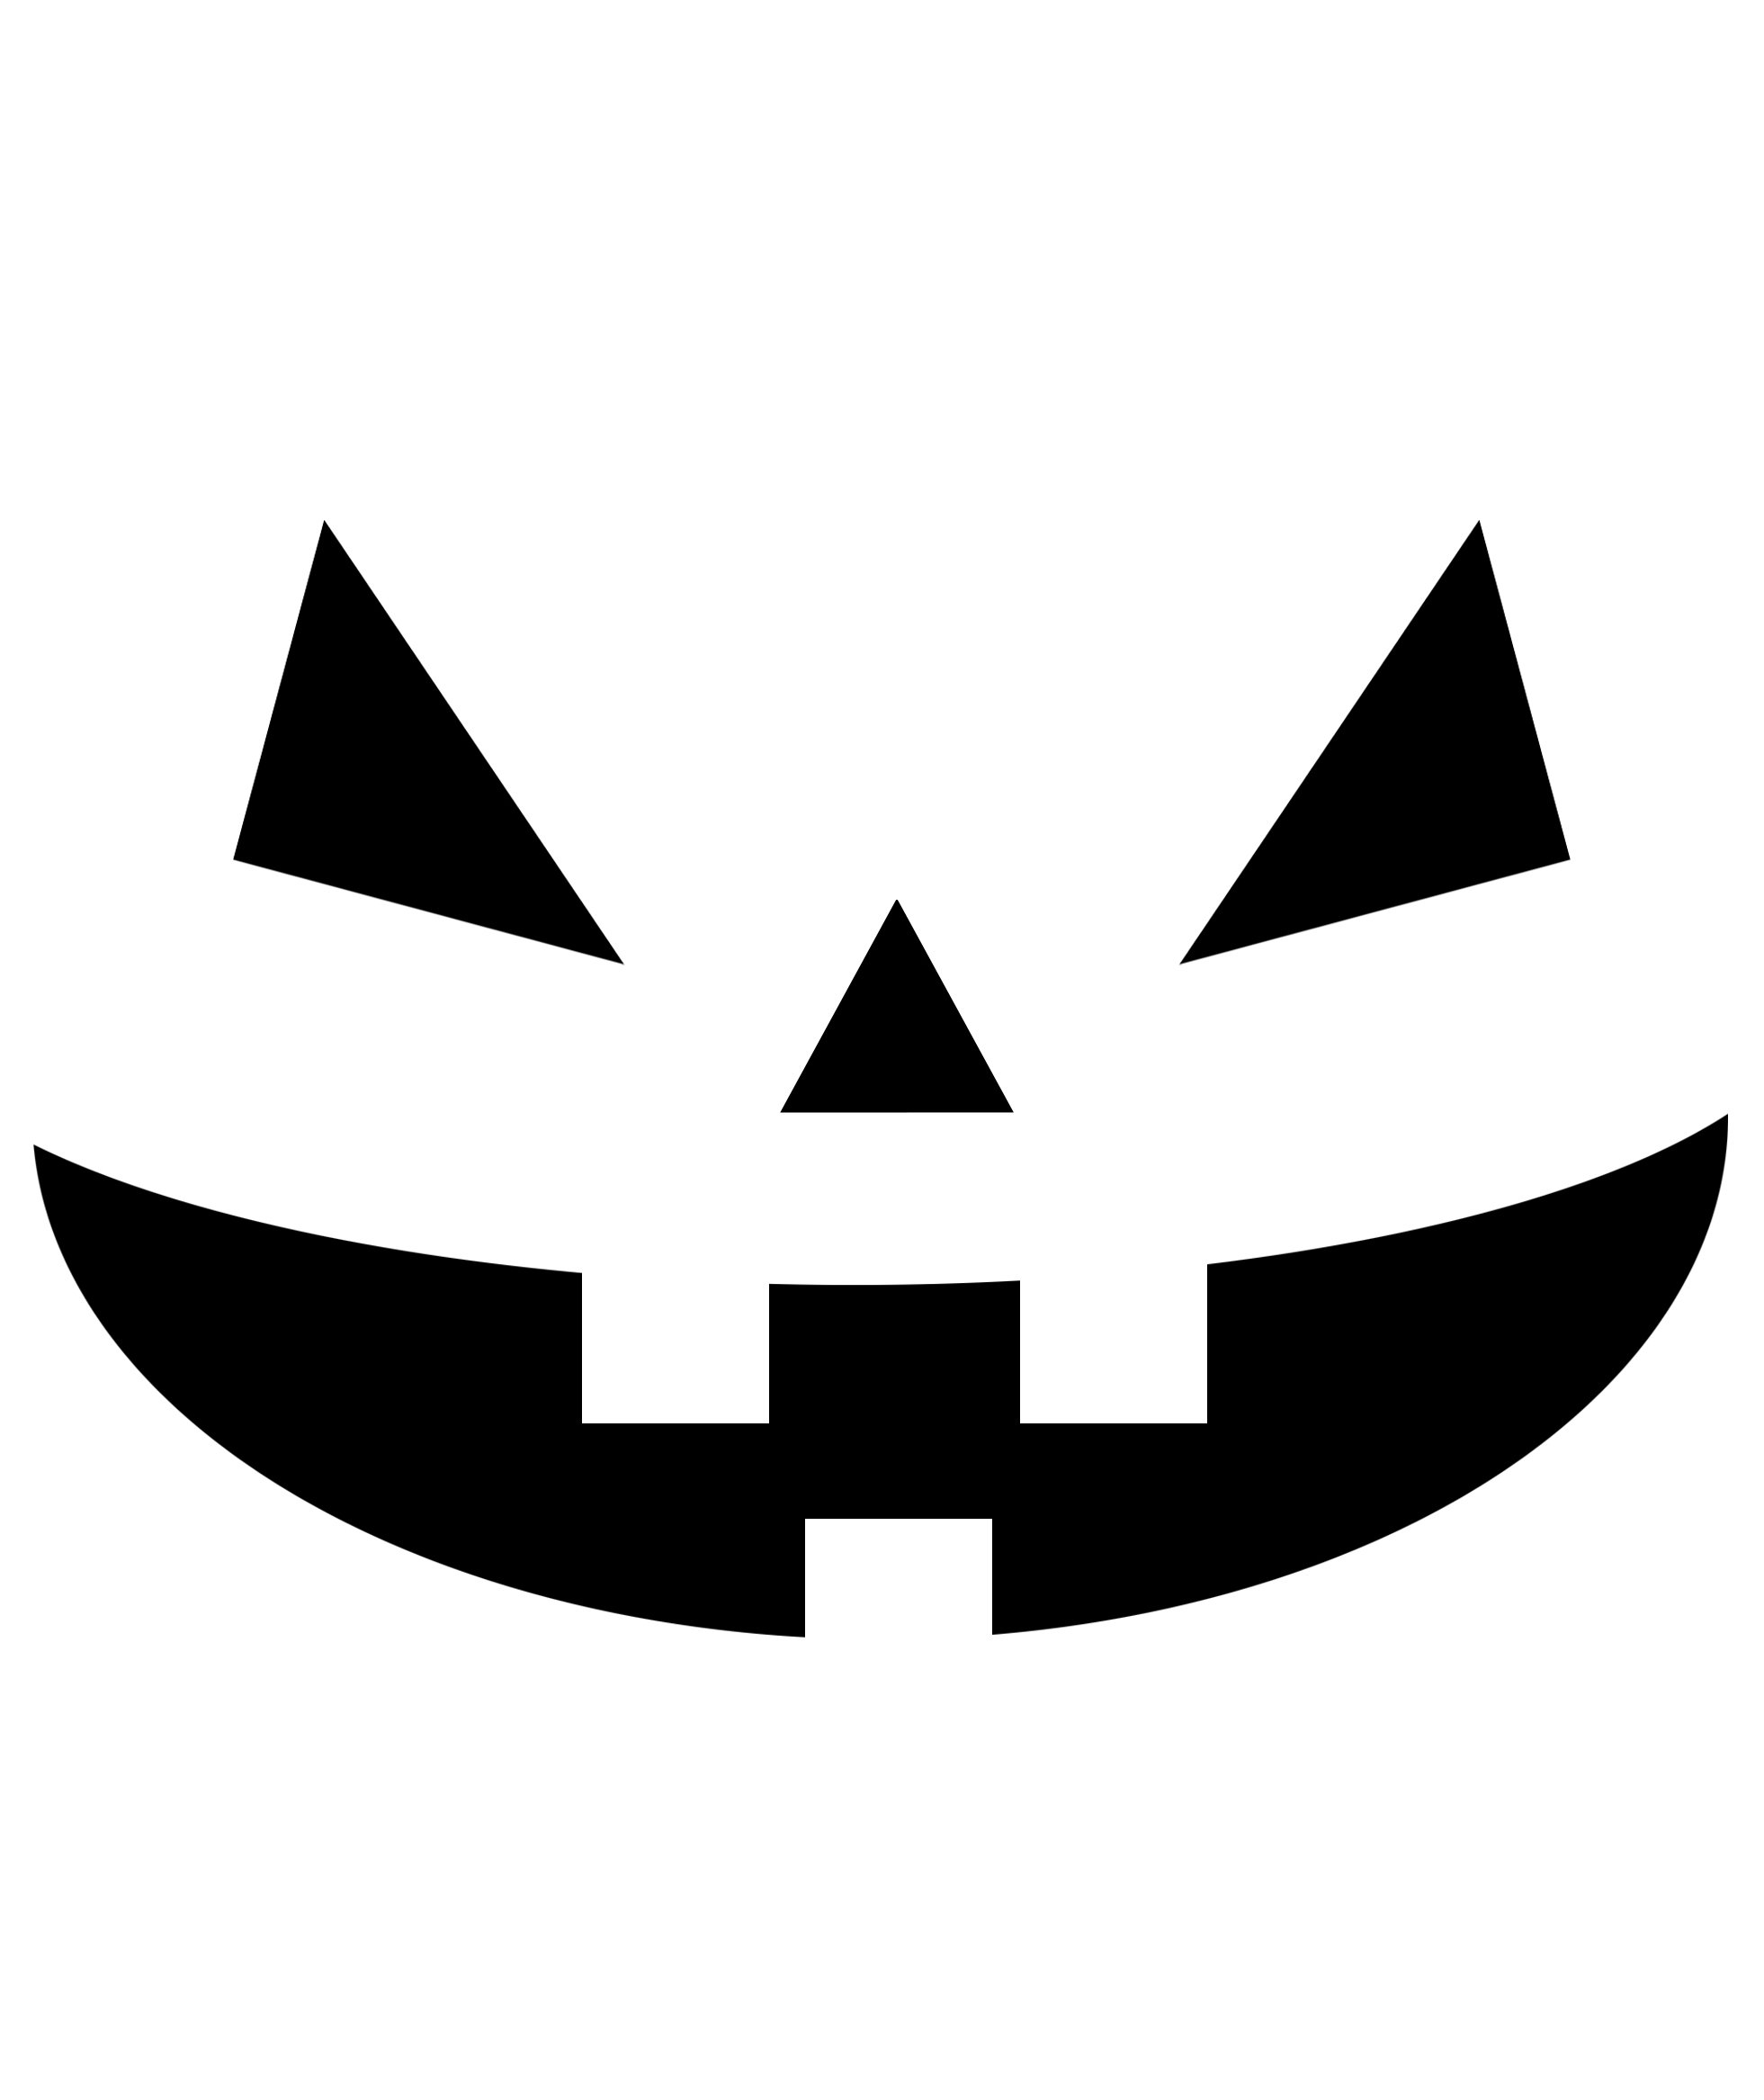 Create creepy Halloween carvings with these pumpkin stencils | Creative ...